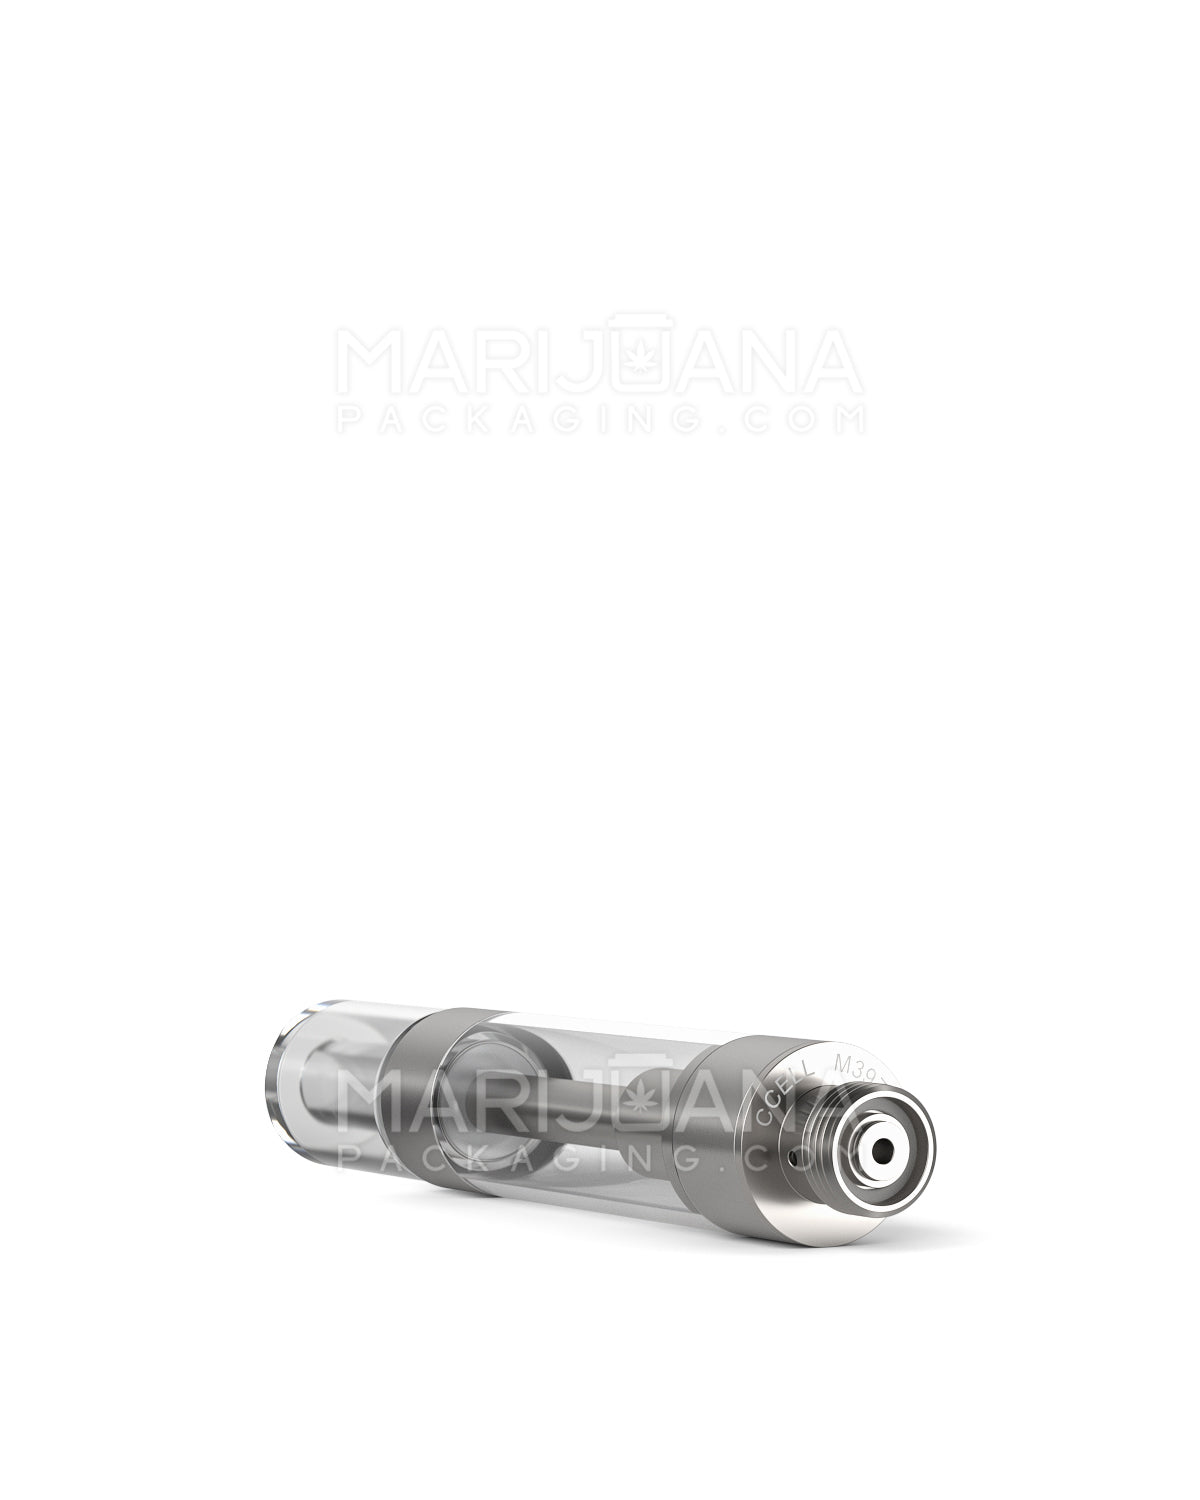 CCELL | Liquid6 Reactor Plastic Vape Cartridge with Barrel Clear Plastic Mouthpiece | 1mL - Press On - 100 Count - 7